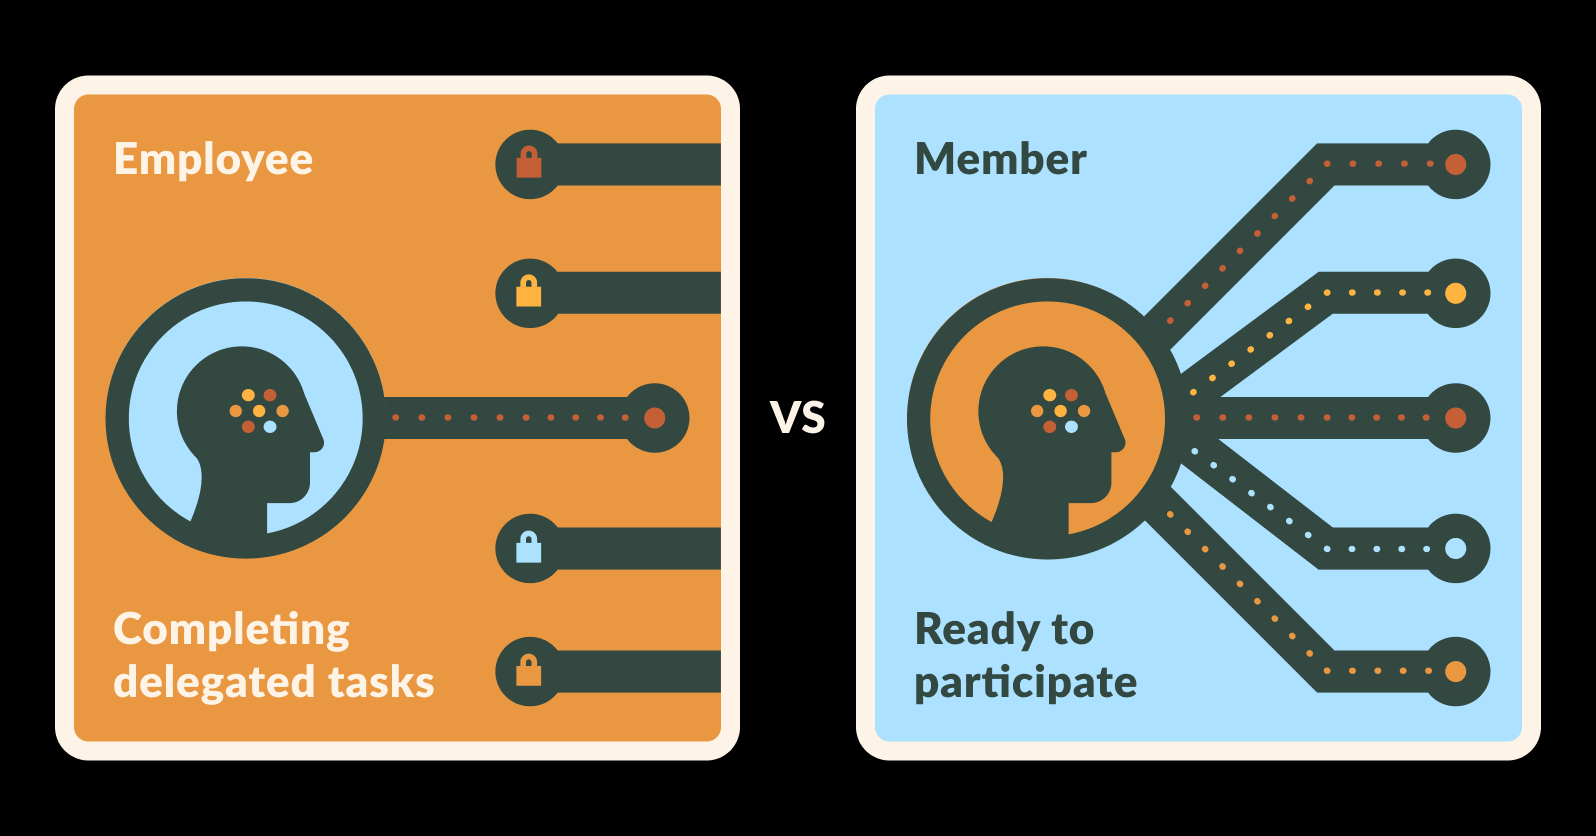 Onboarding to dynamic spaces means preparing new community members to participate, not complete predefined tasks.